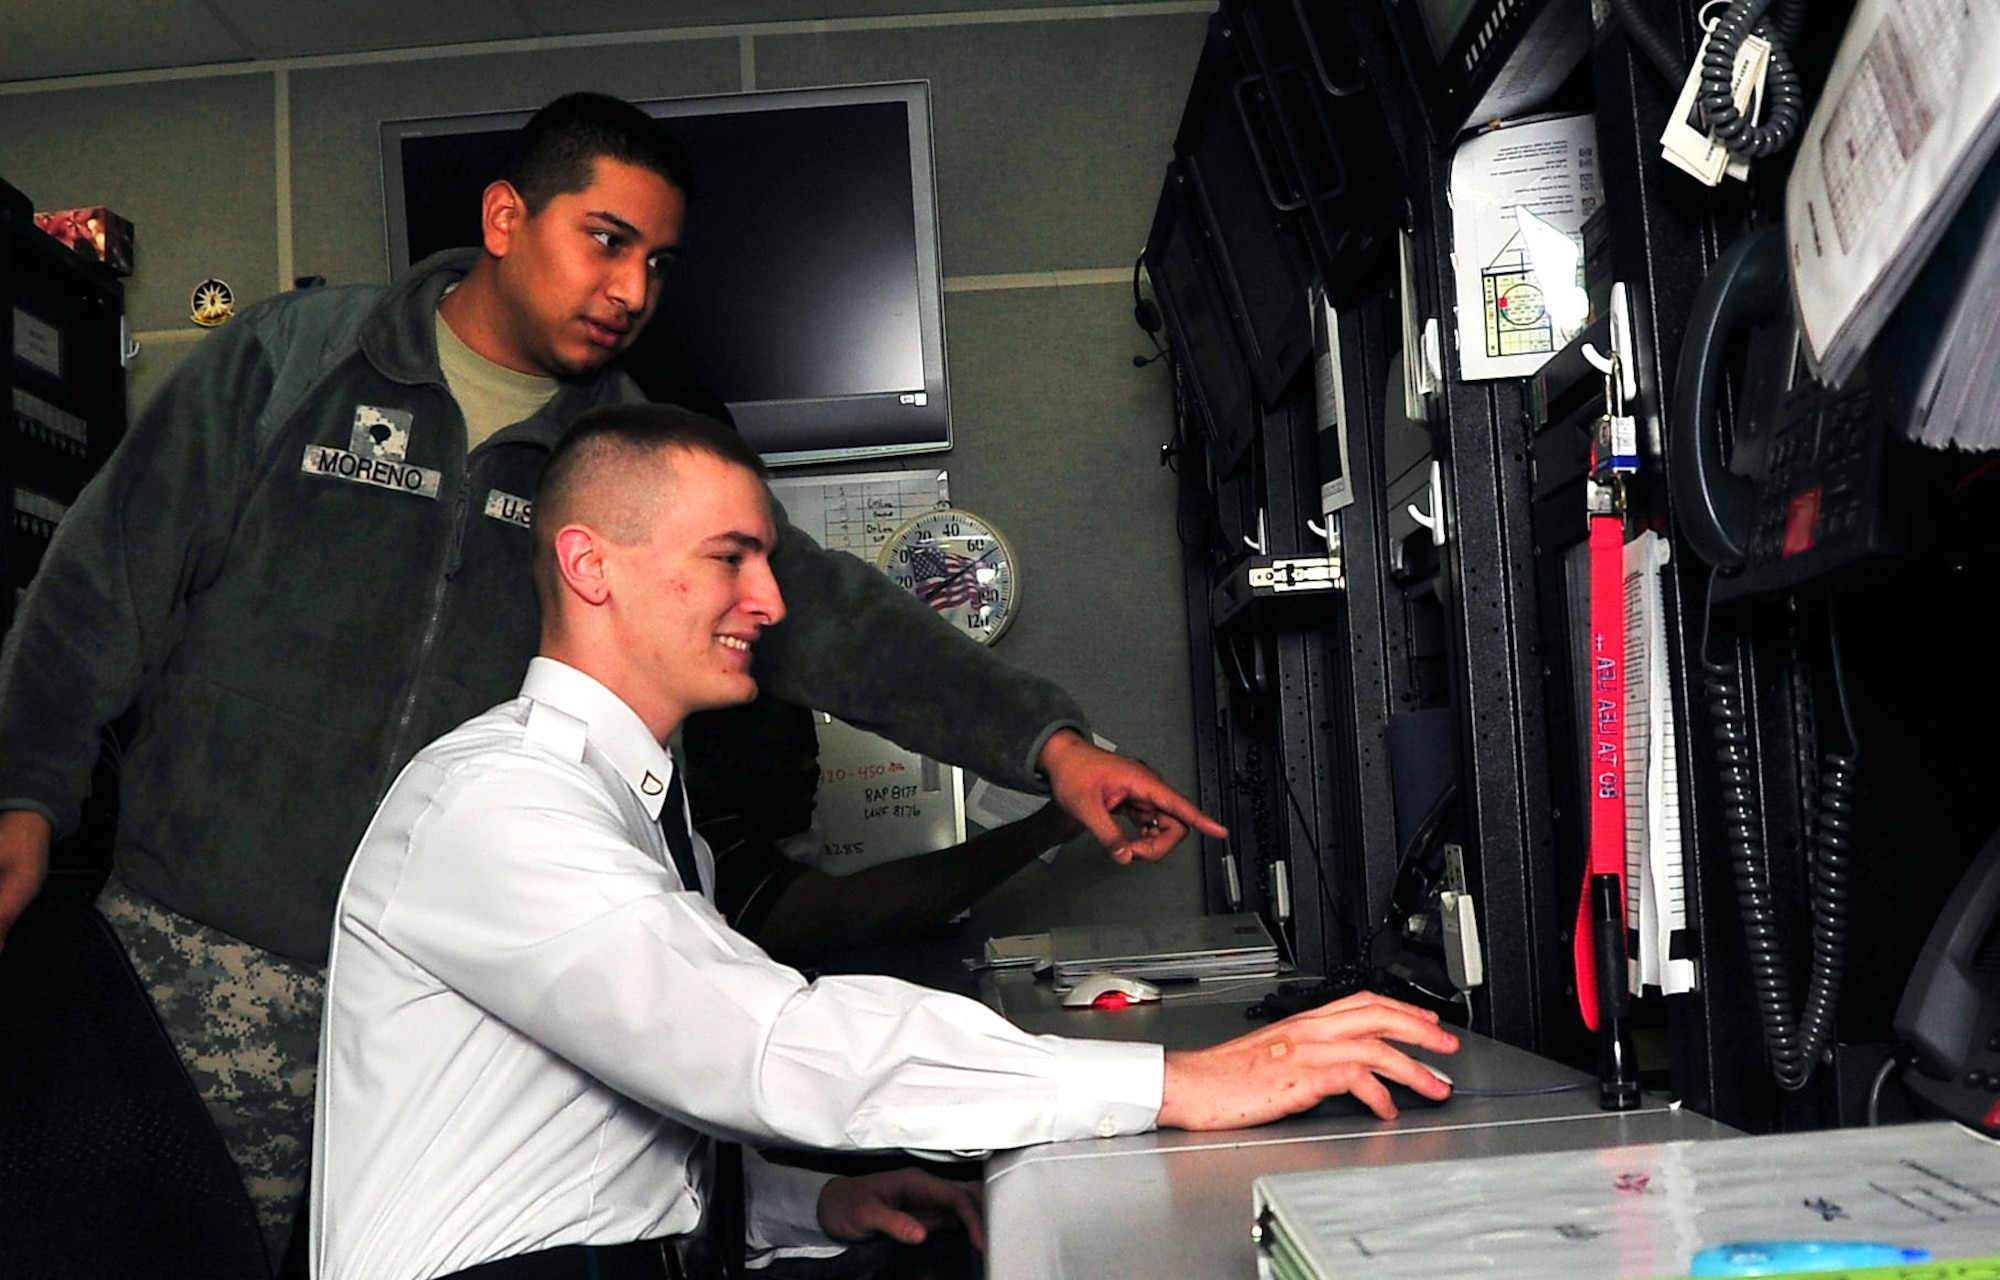 Spc. Carlos Moreno and Pfc. Anthony Rudd, 8th Army Early Warning Systems operators, work together in the 607th Air Operations Center after the two units merged together recently. The 8th Army Joint Interface Control Cell merged with the 607th Air Operations Center to streamline both organizations. (U.S. Air Force photo/Staff Sgt. Stefanie Torres)